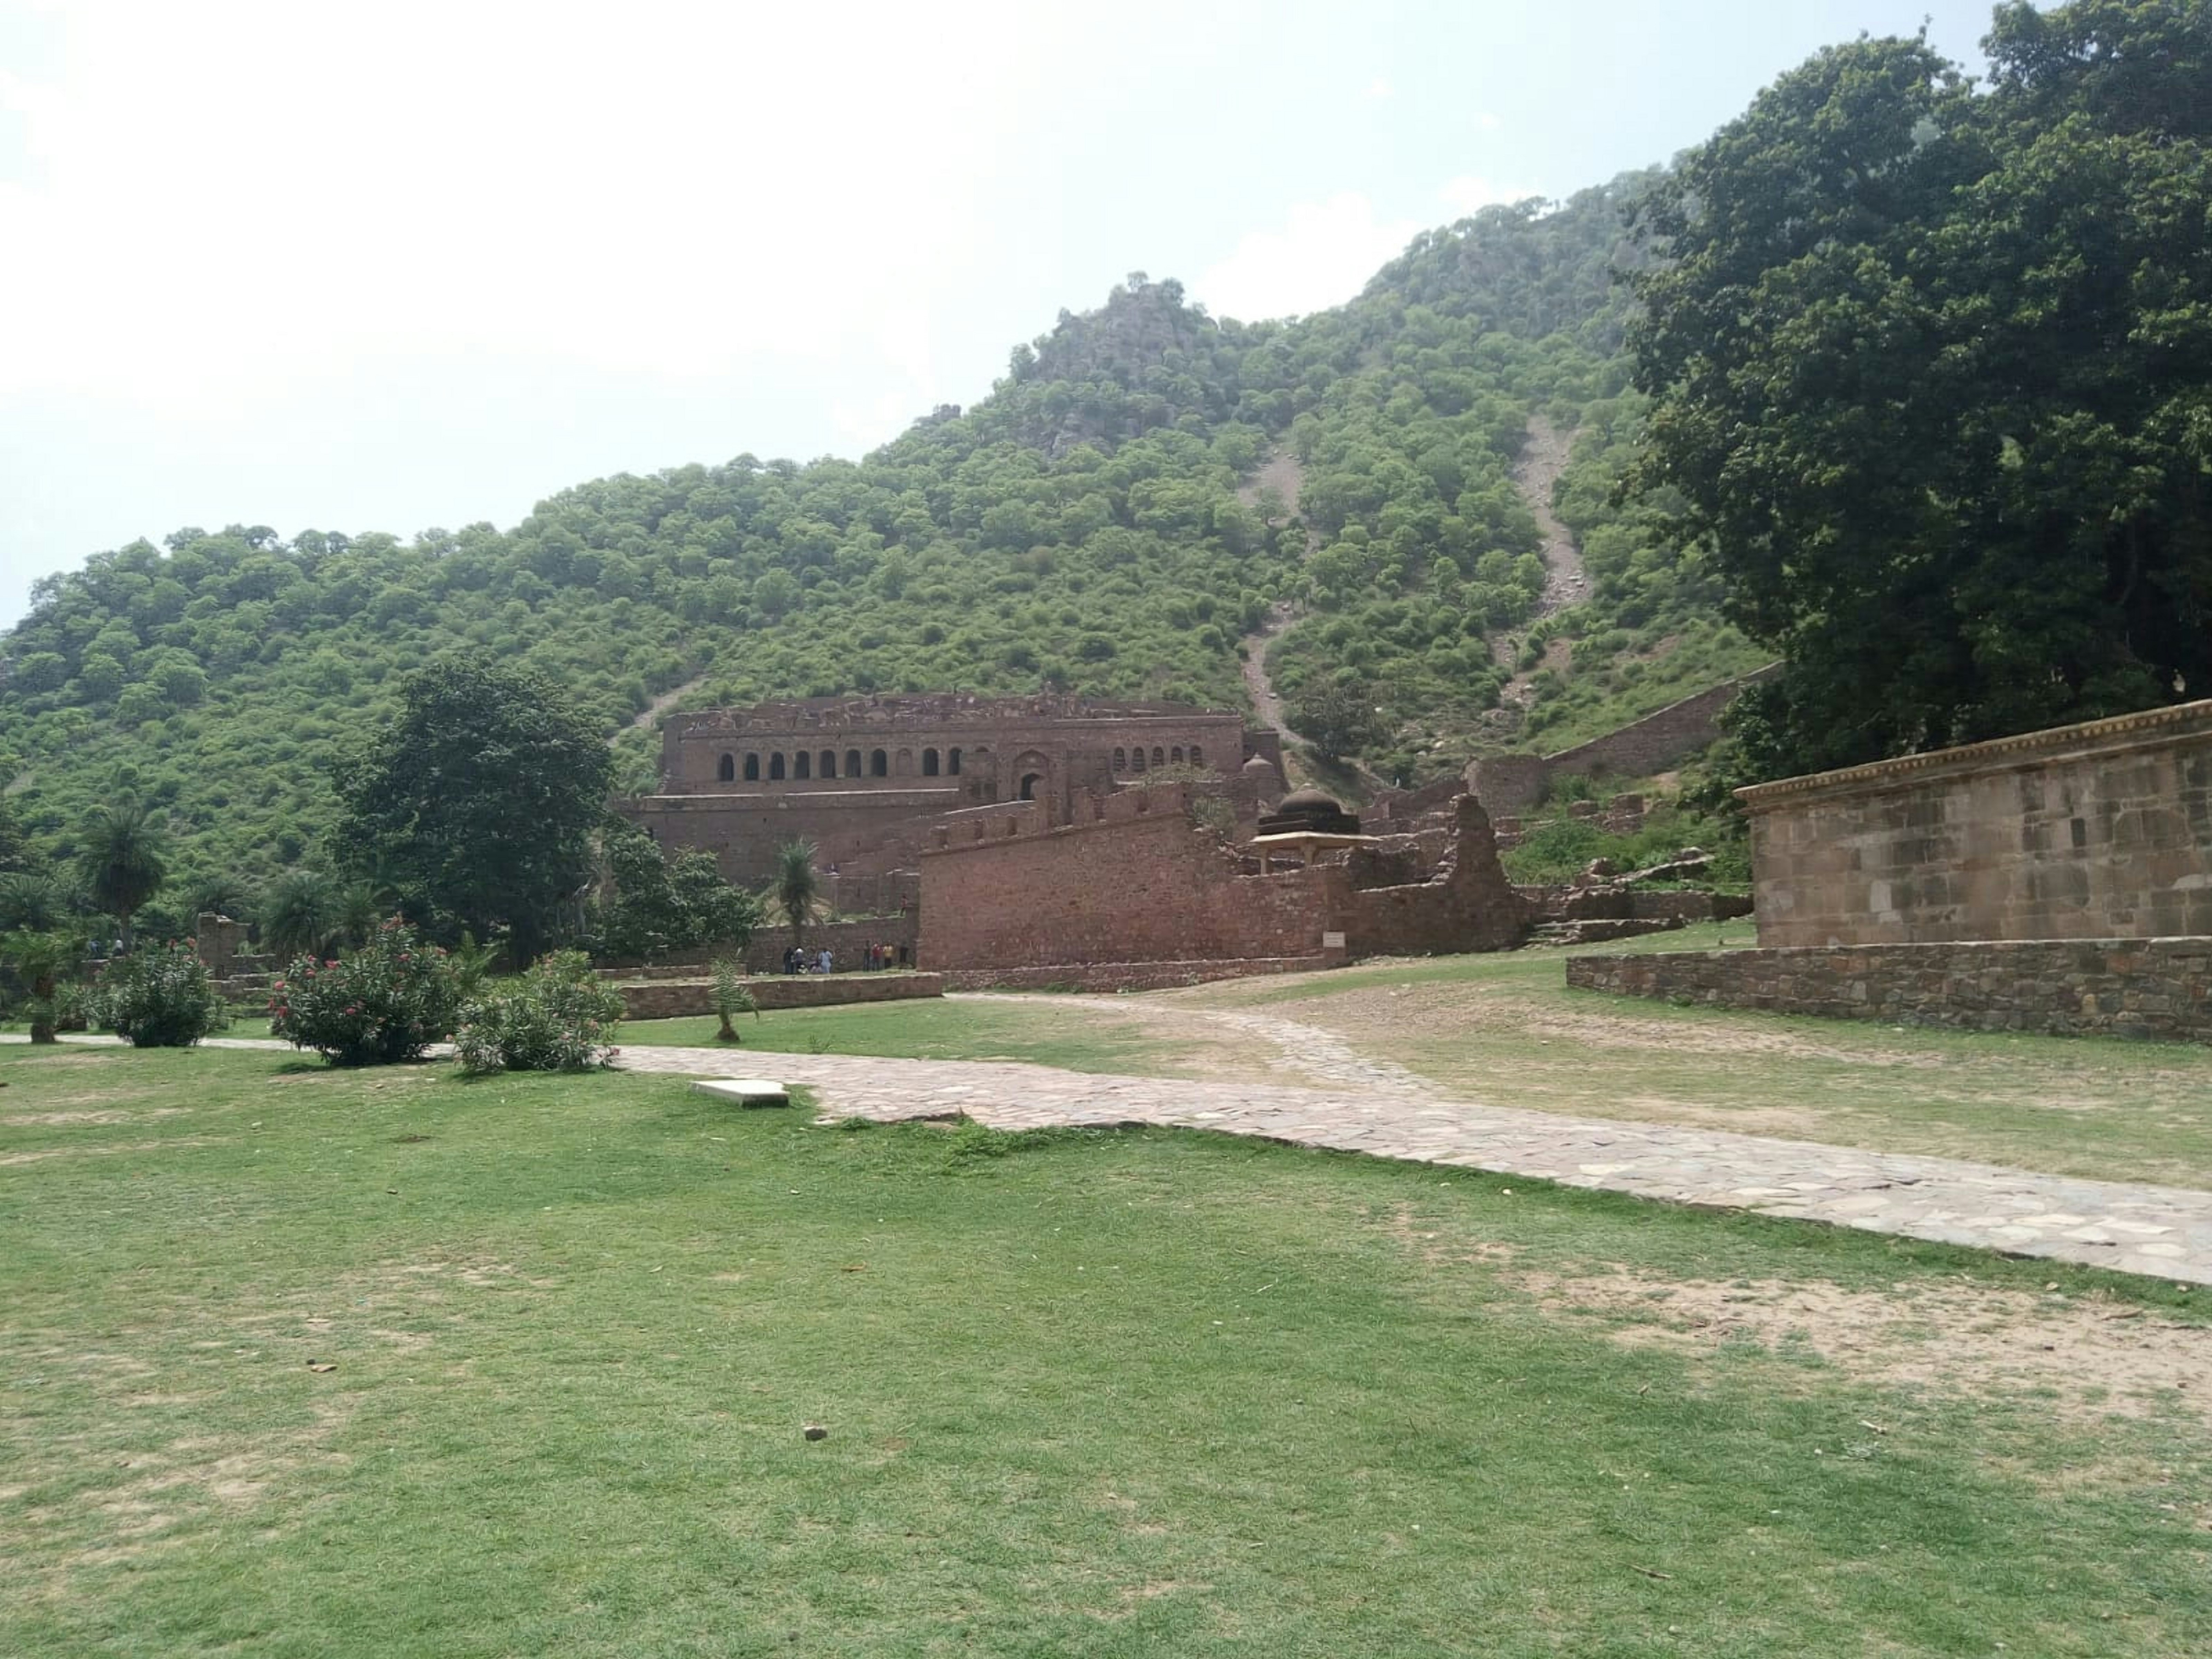 Bhangarh Fort is in Rajasthan, India. It's an old fort that people say is haunted. It's now a protected place you can visit during the day.